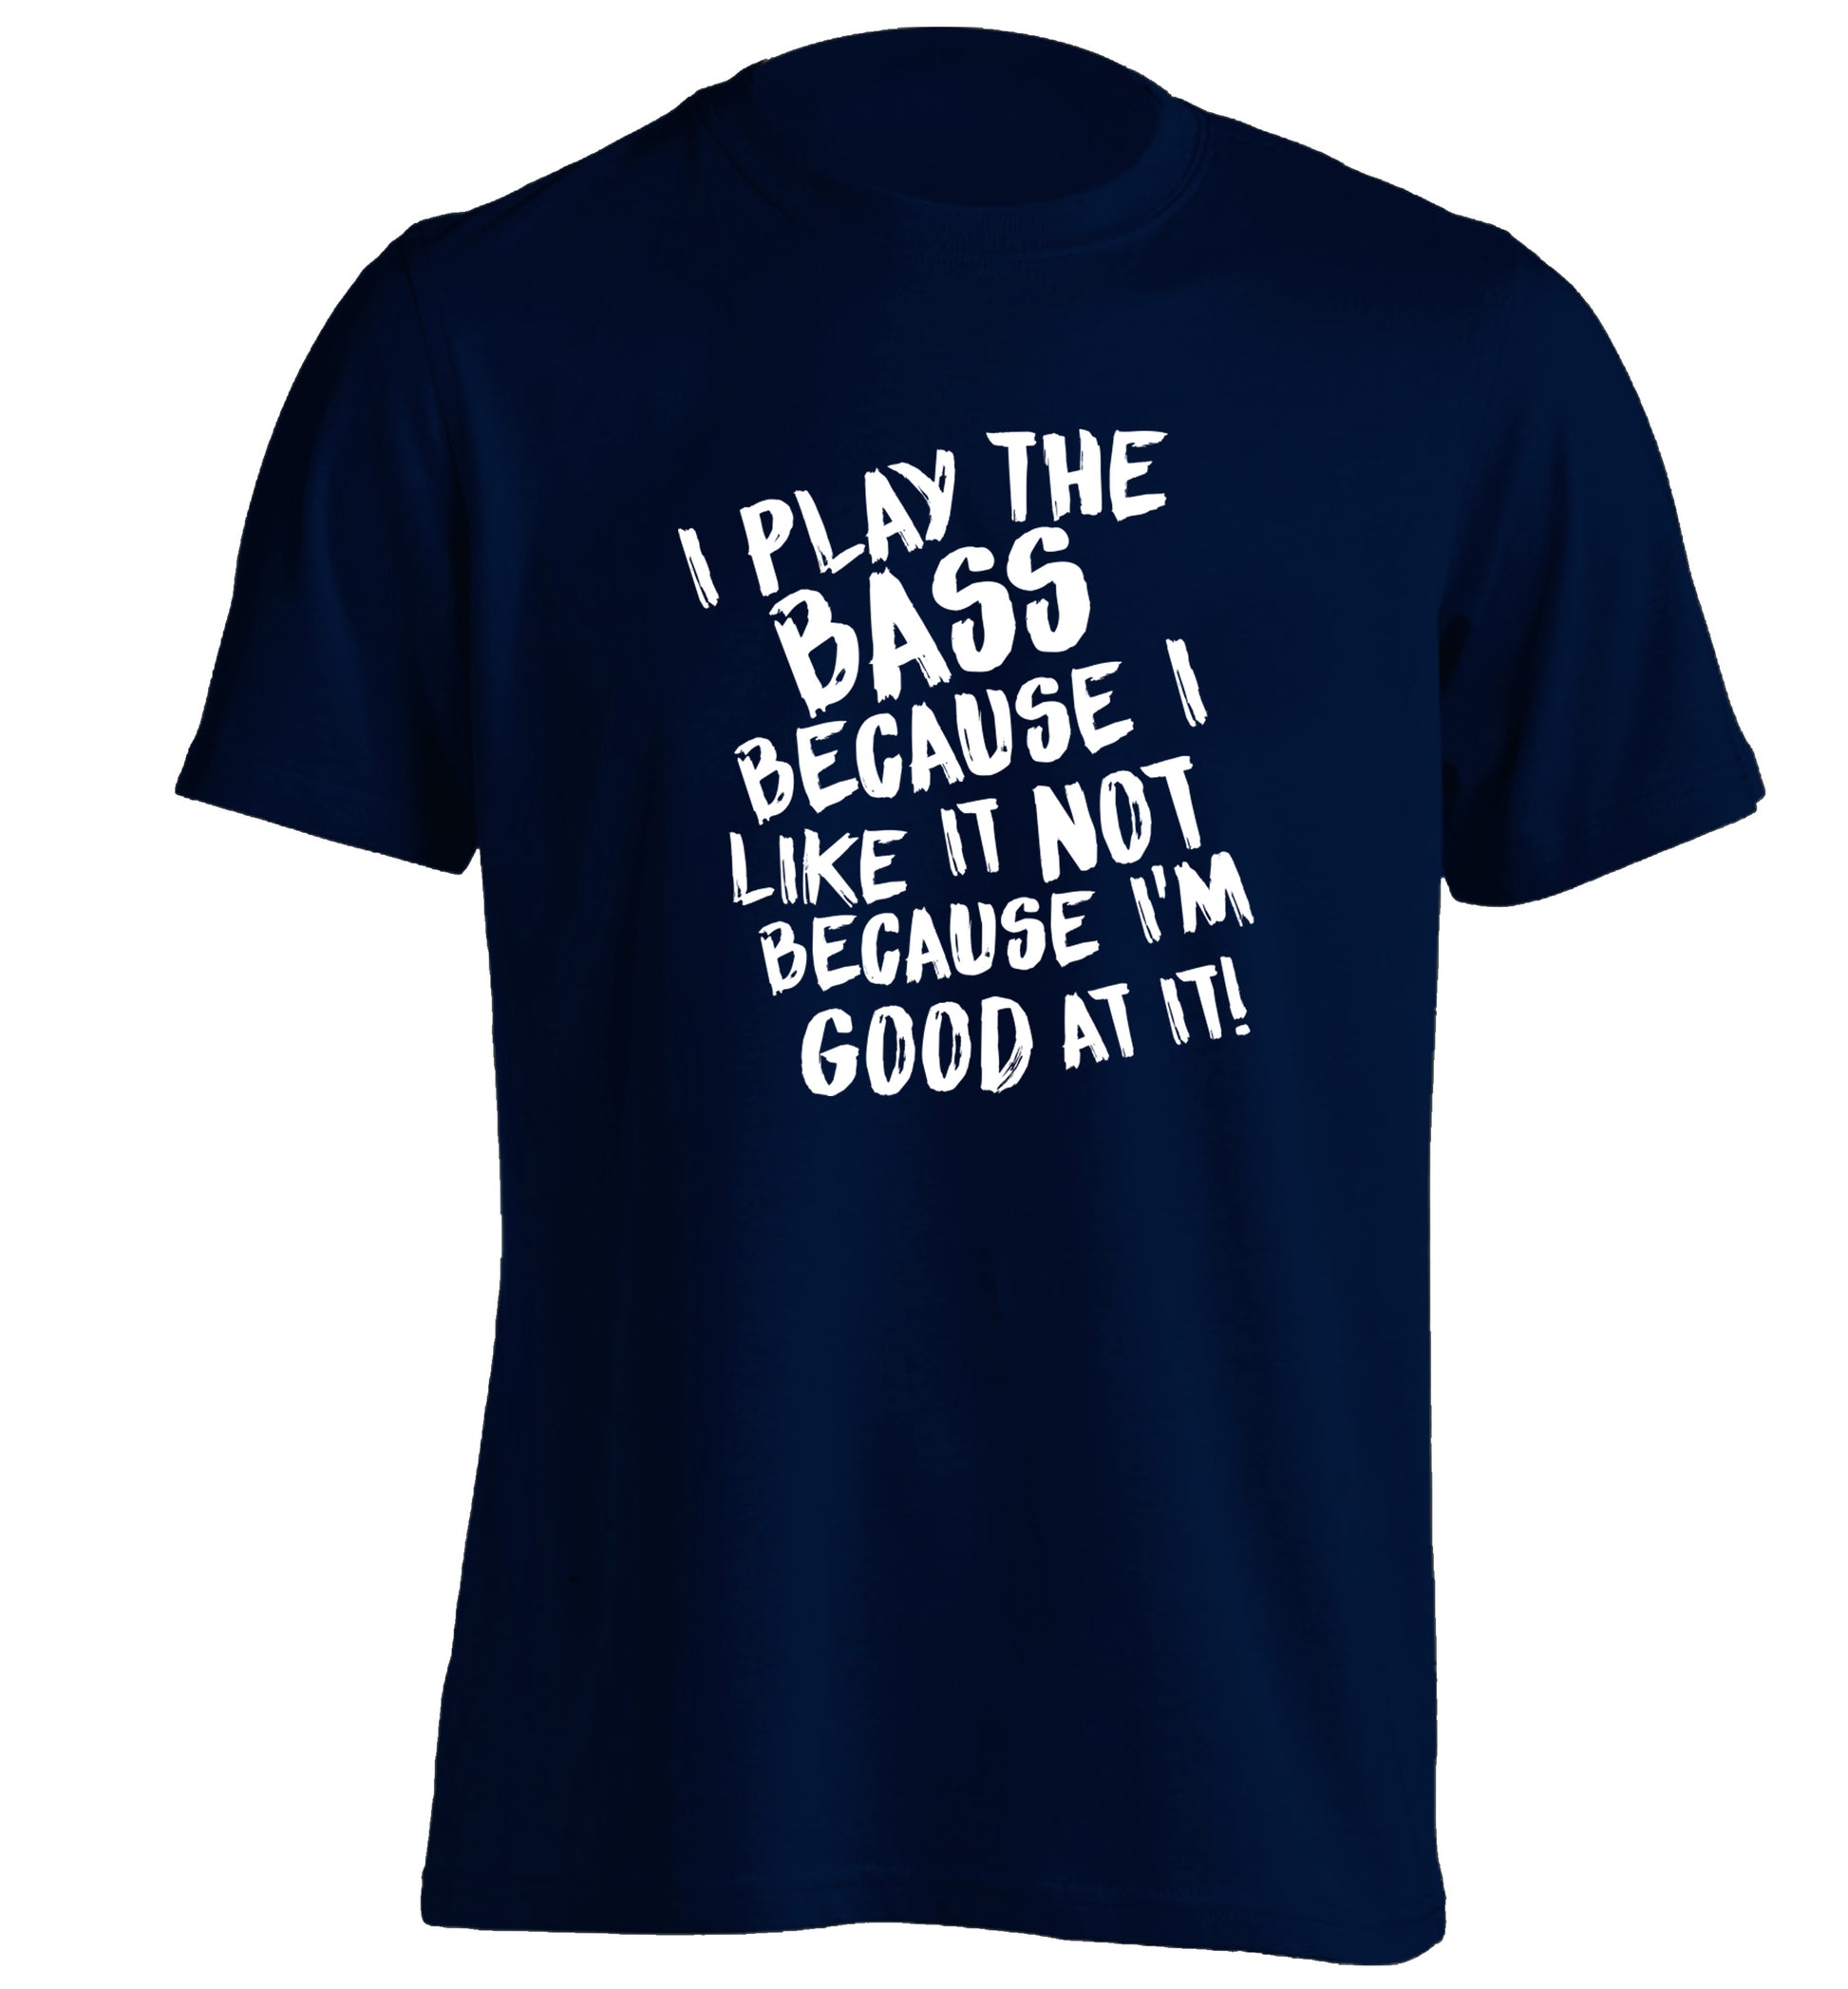 I play the bass because I like it not because I'm good at it adults unisex navy Tshirt 2XL